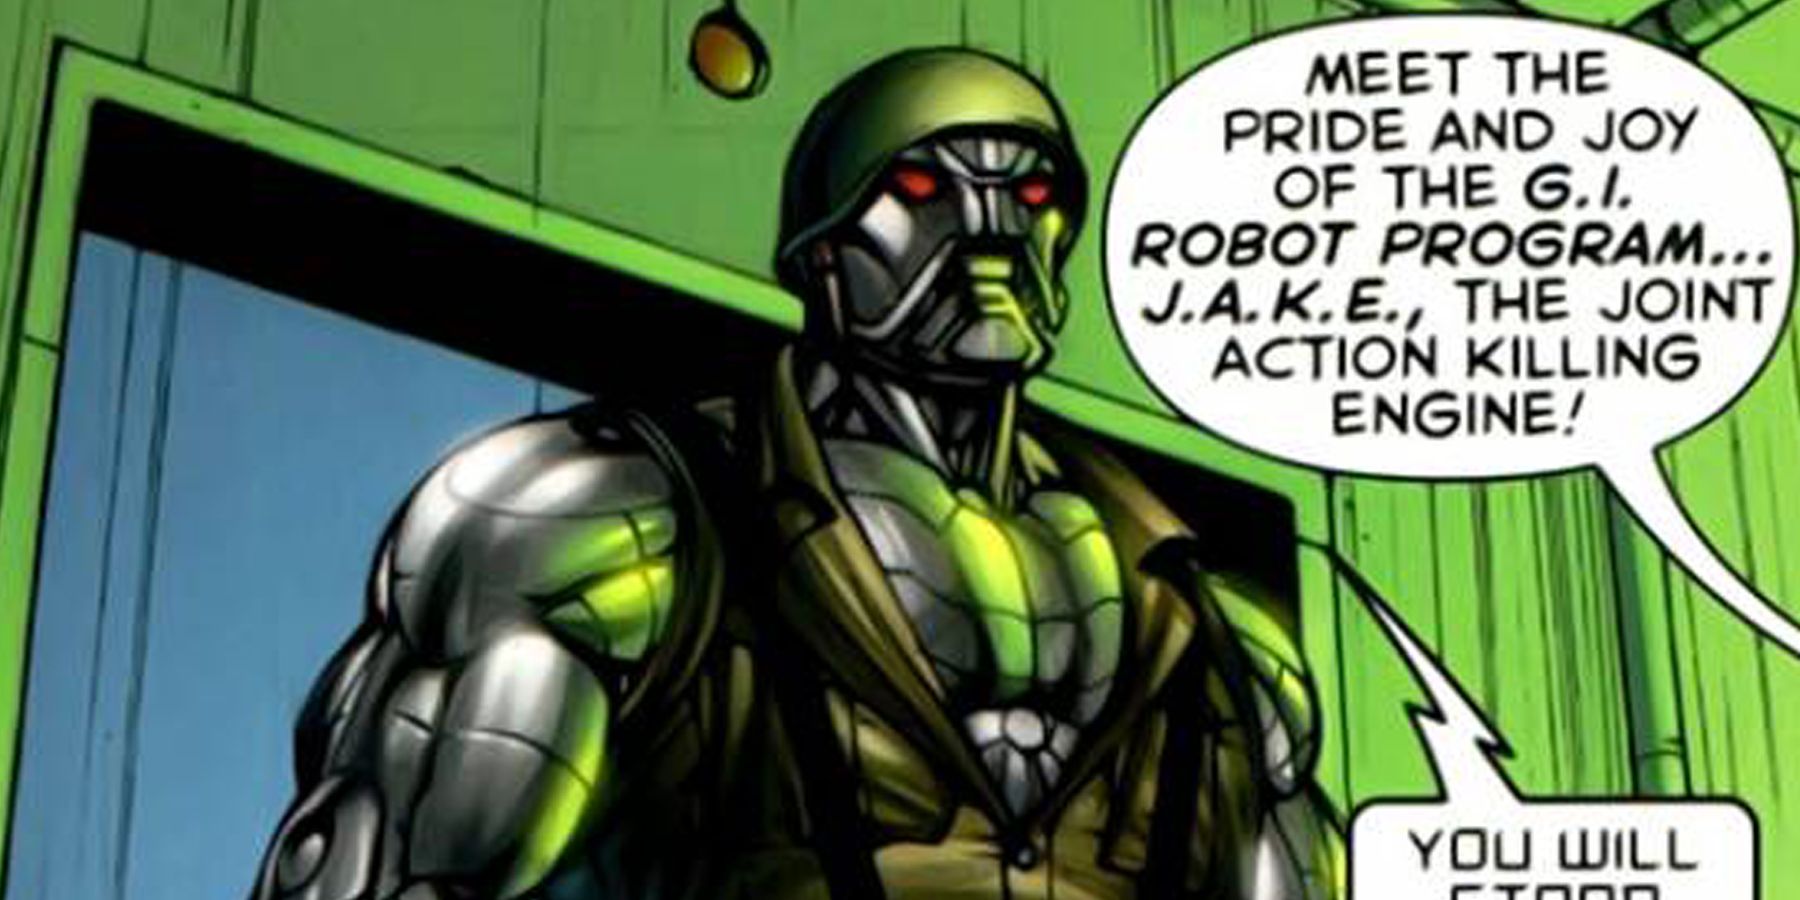 The G.I. Robot named J.A.K.E. from DC Comics